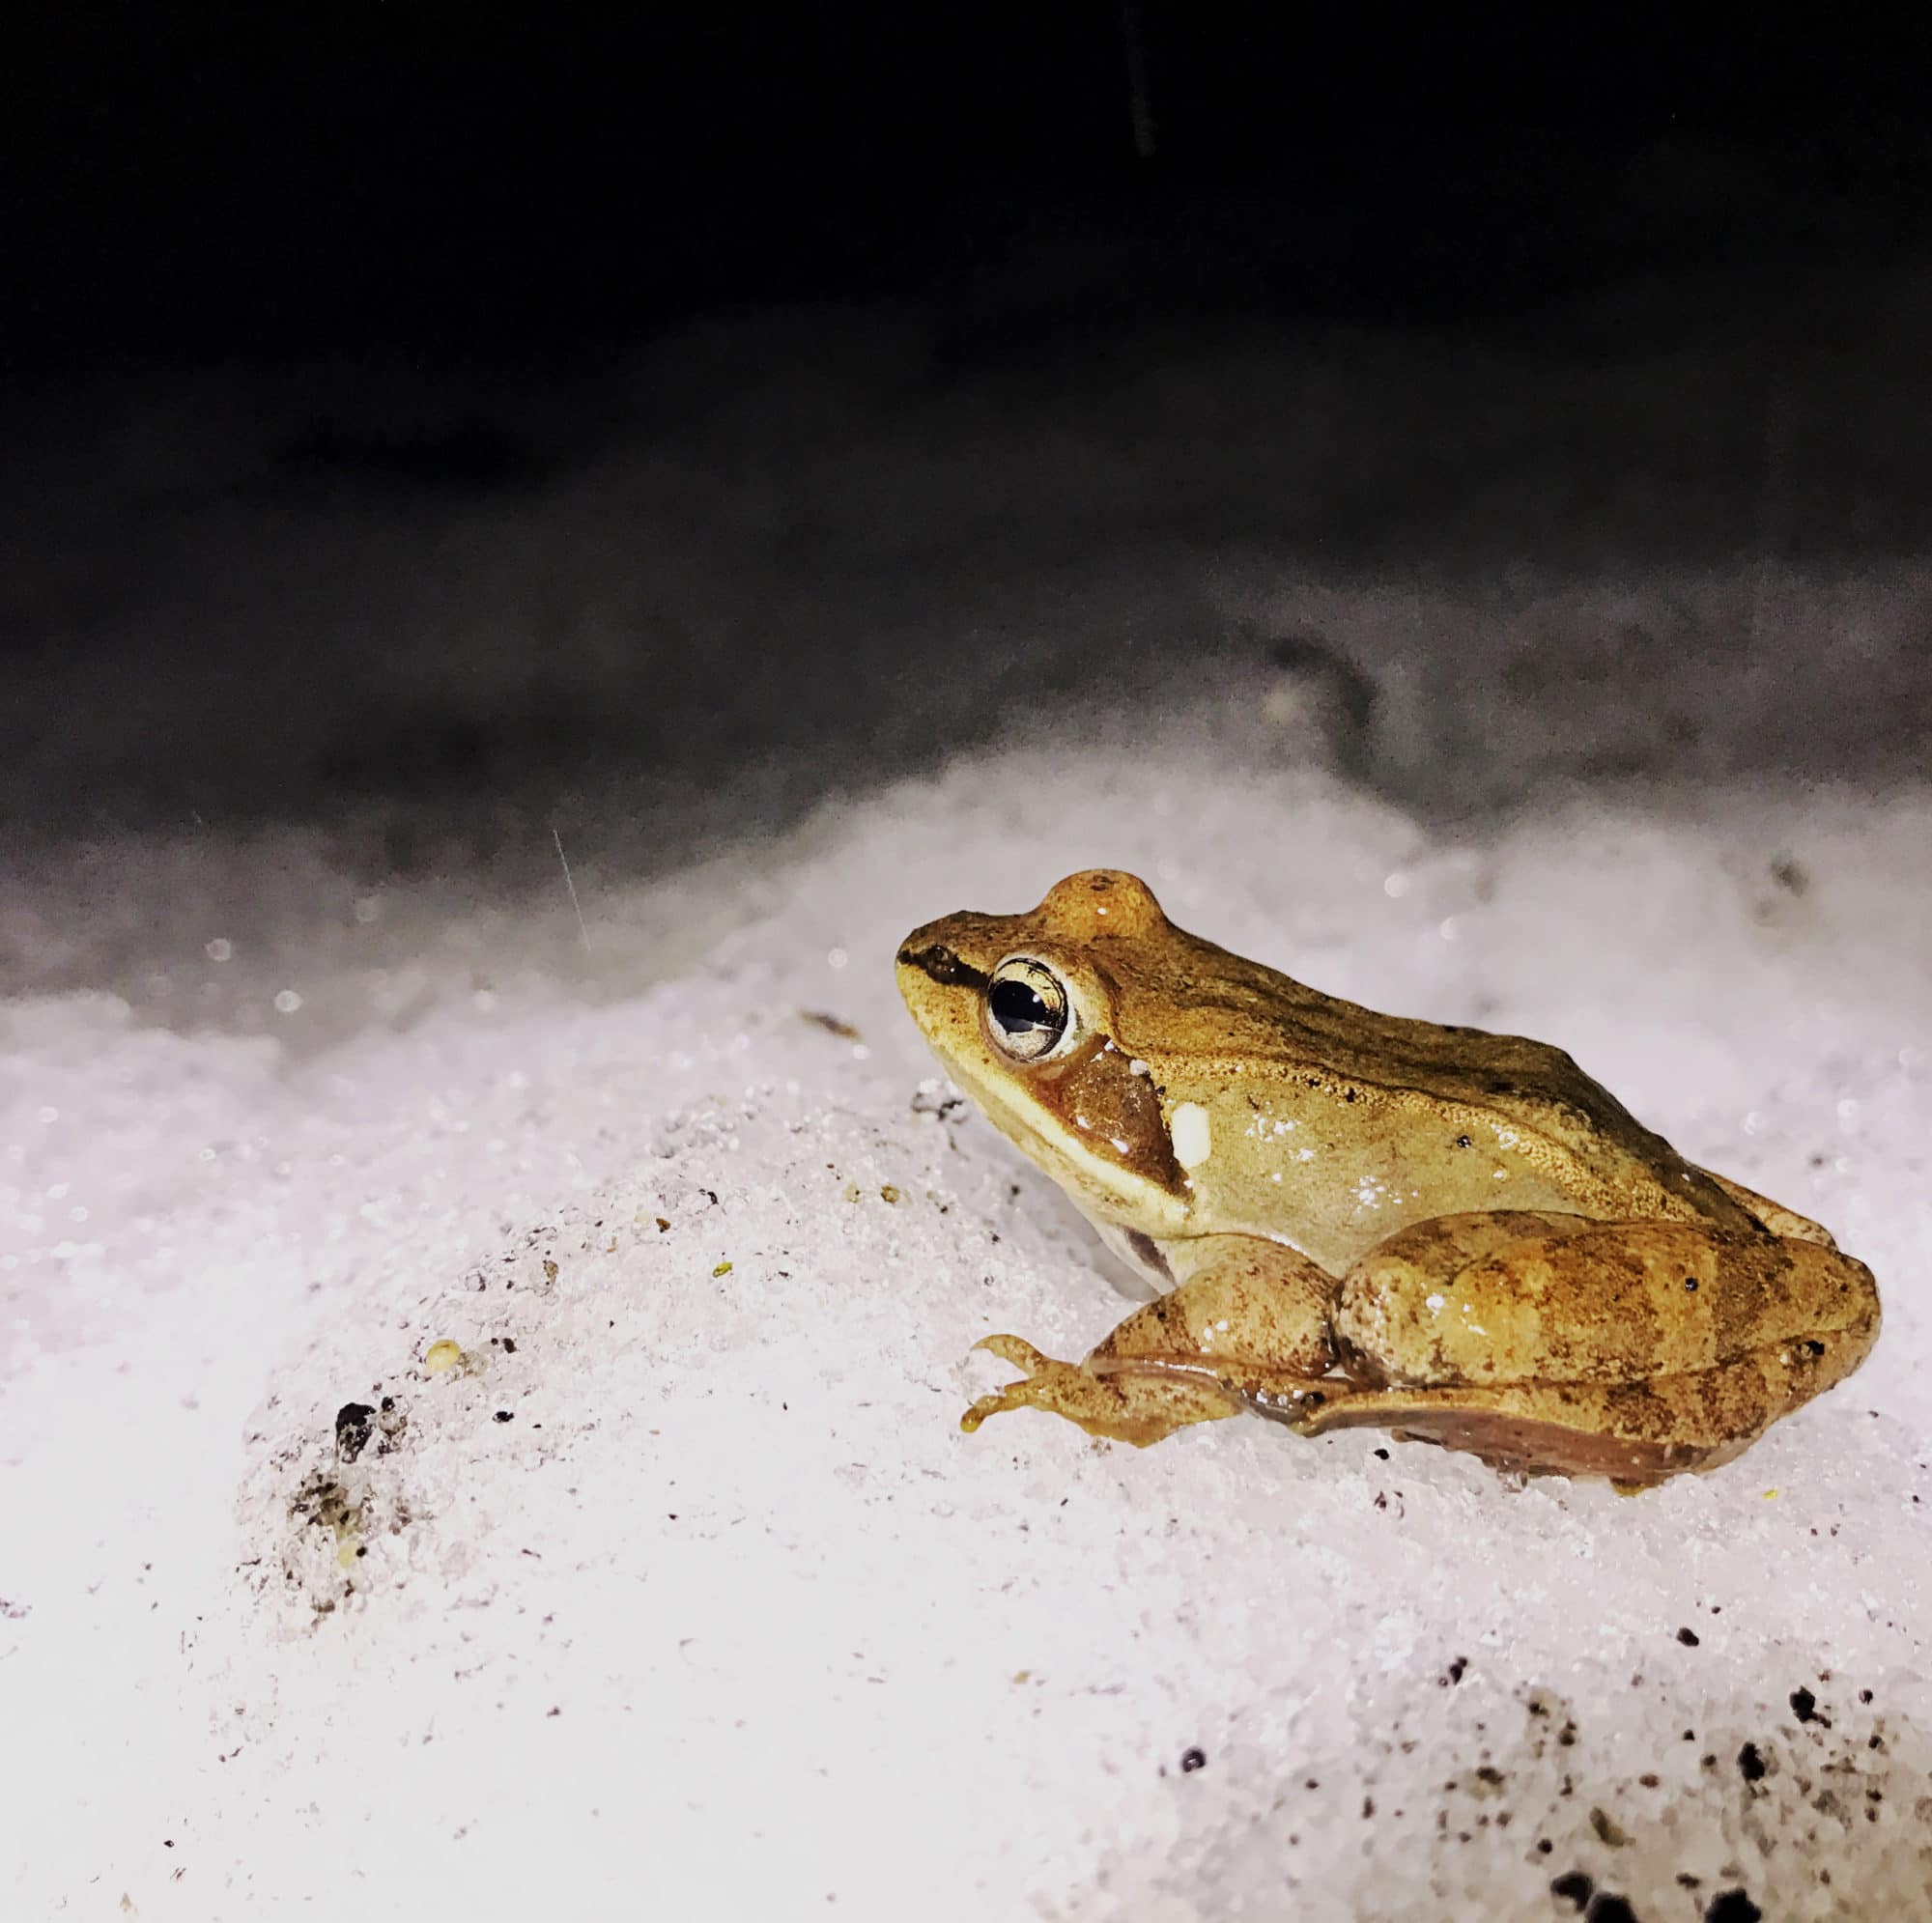 A wood frog pauses on a pile of snow. (photo © Brett Amy Thelen)